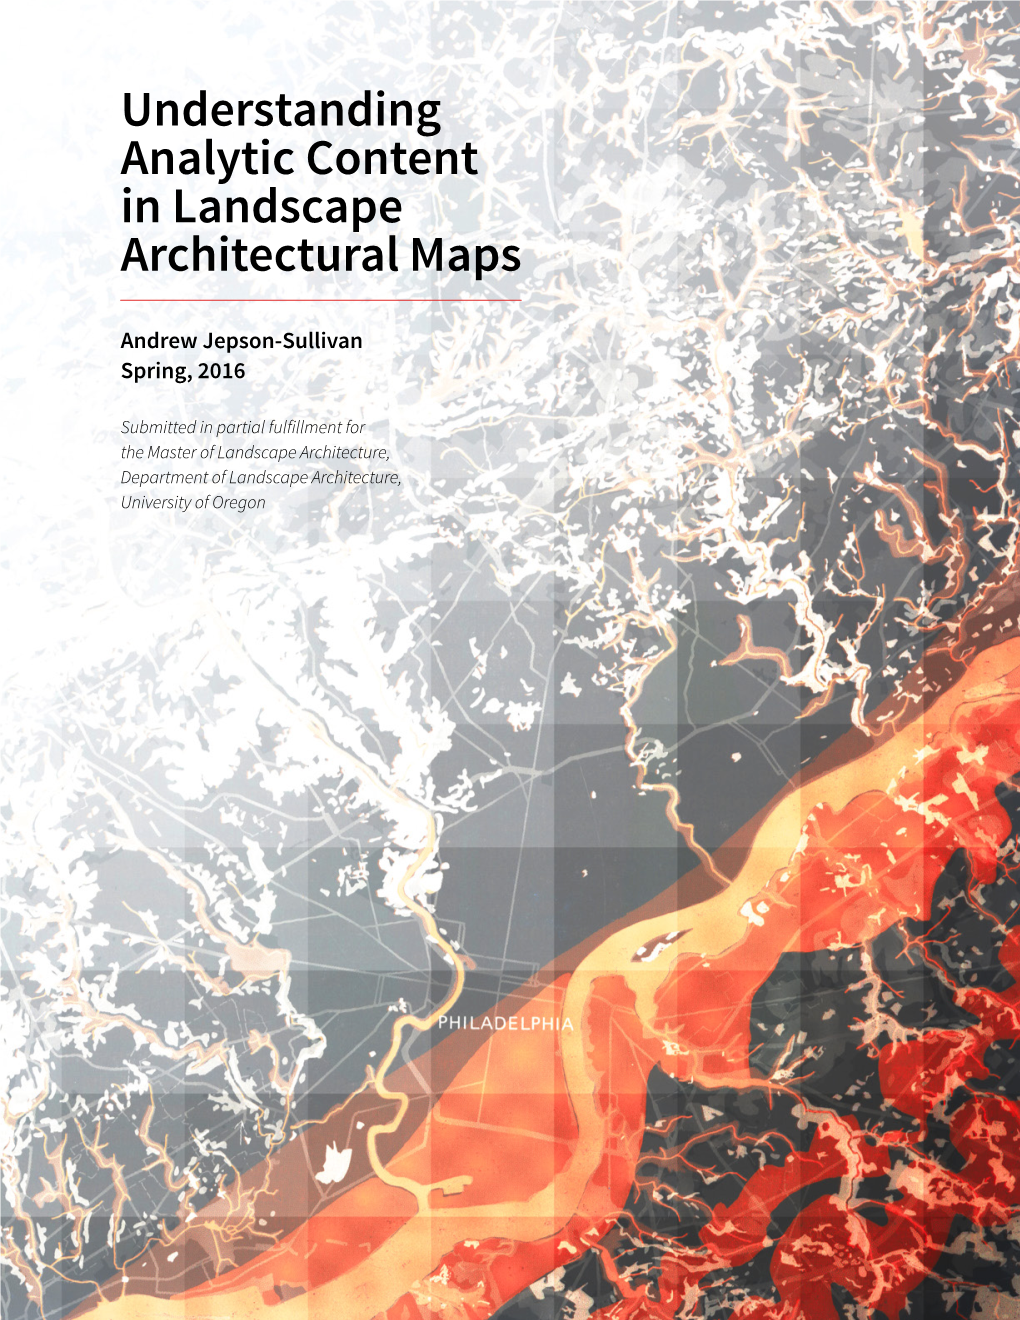 Understanding Analytic Content in Landscape Architectural Maps